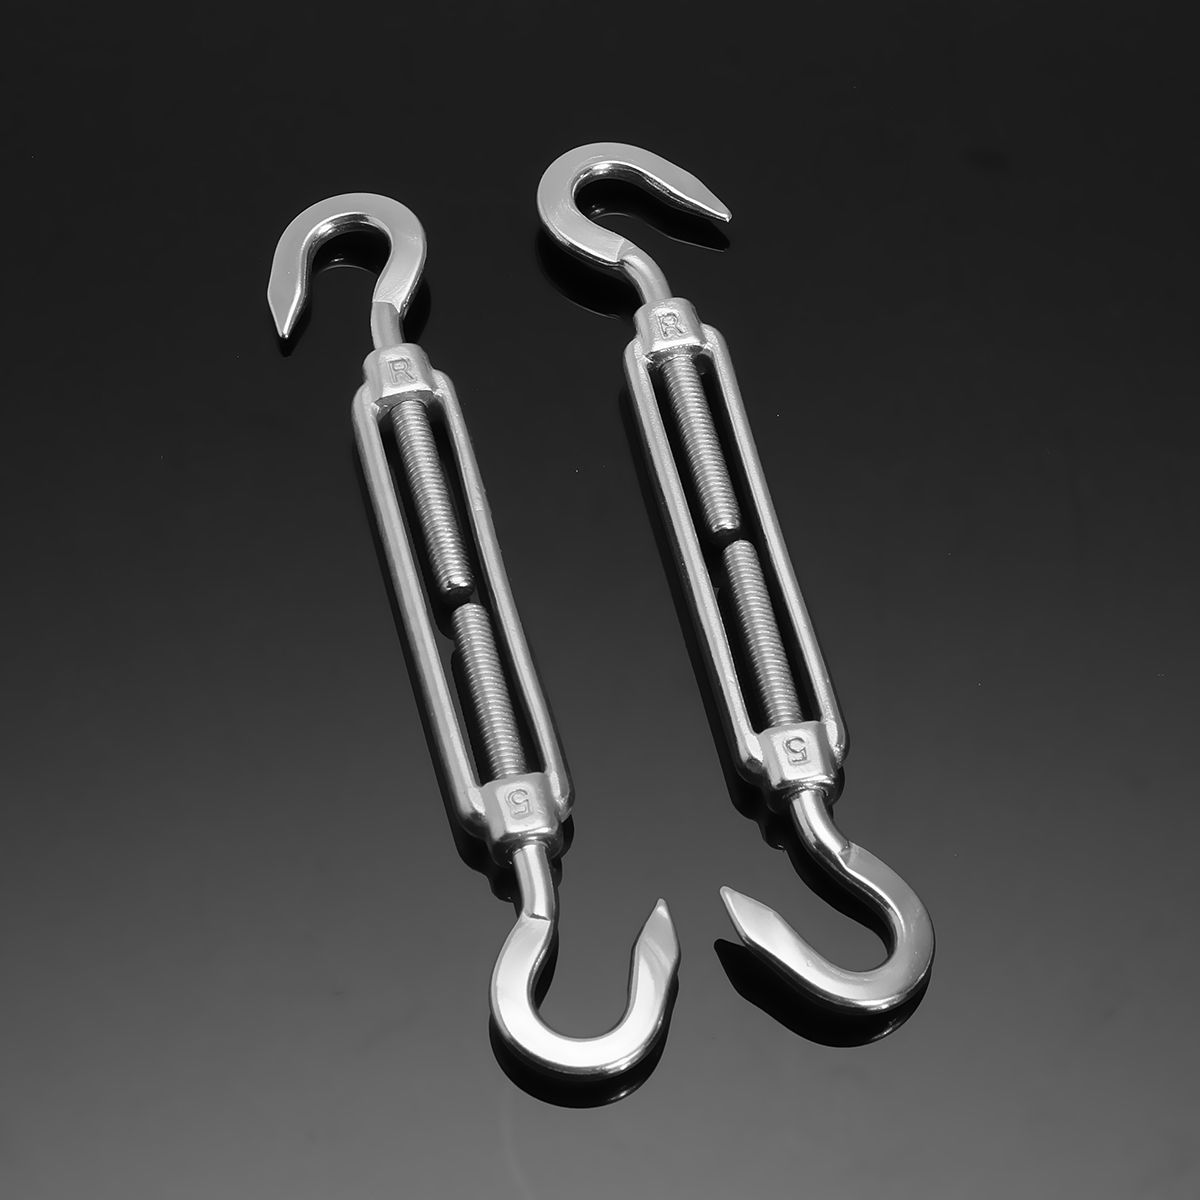 8pcs-Stainless-Steel-Sun-Sail-Shade-Canopy-Fixing-Fittings-Padeye-Turnbuckle-Snap-Hook-1242290